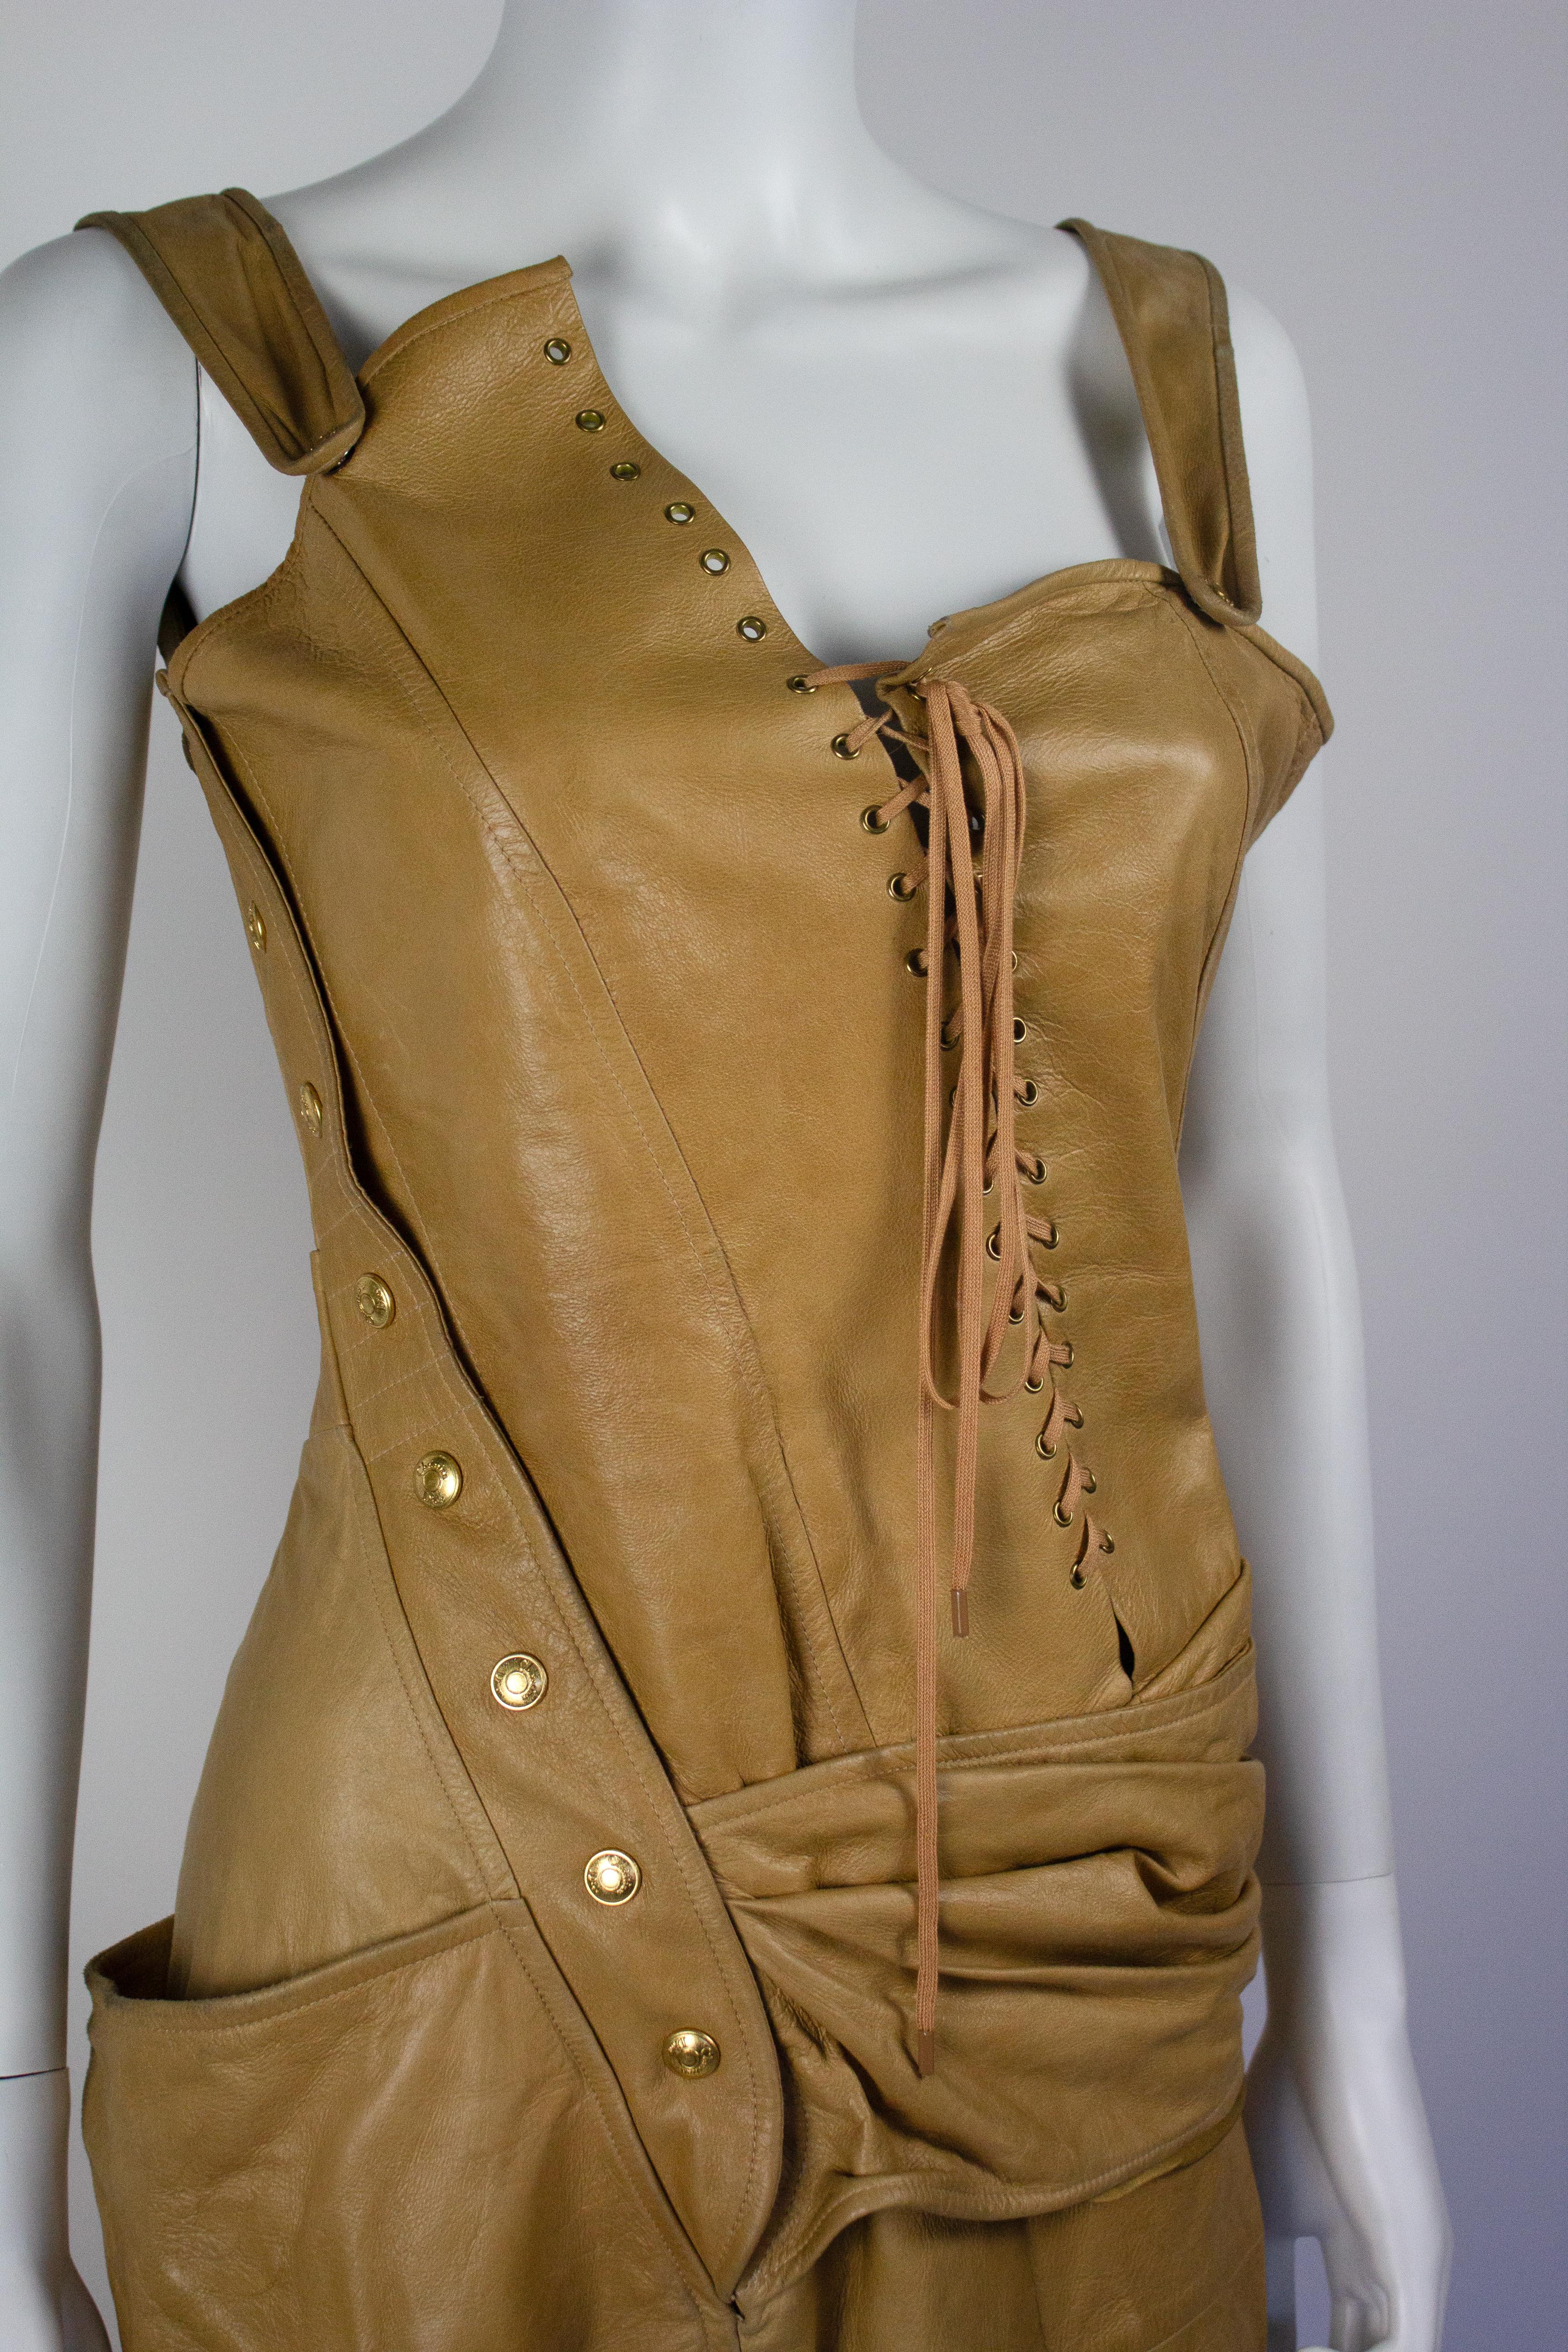 Christian Dior deconstructed tan leather dress from the Spring/Summer 2000 collection, designed by John Galliano. As seen on the runway. Corset style lace up detail to the front.

Condition
Good. The leather has an overall aged look. A few minor